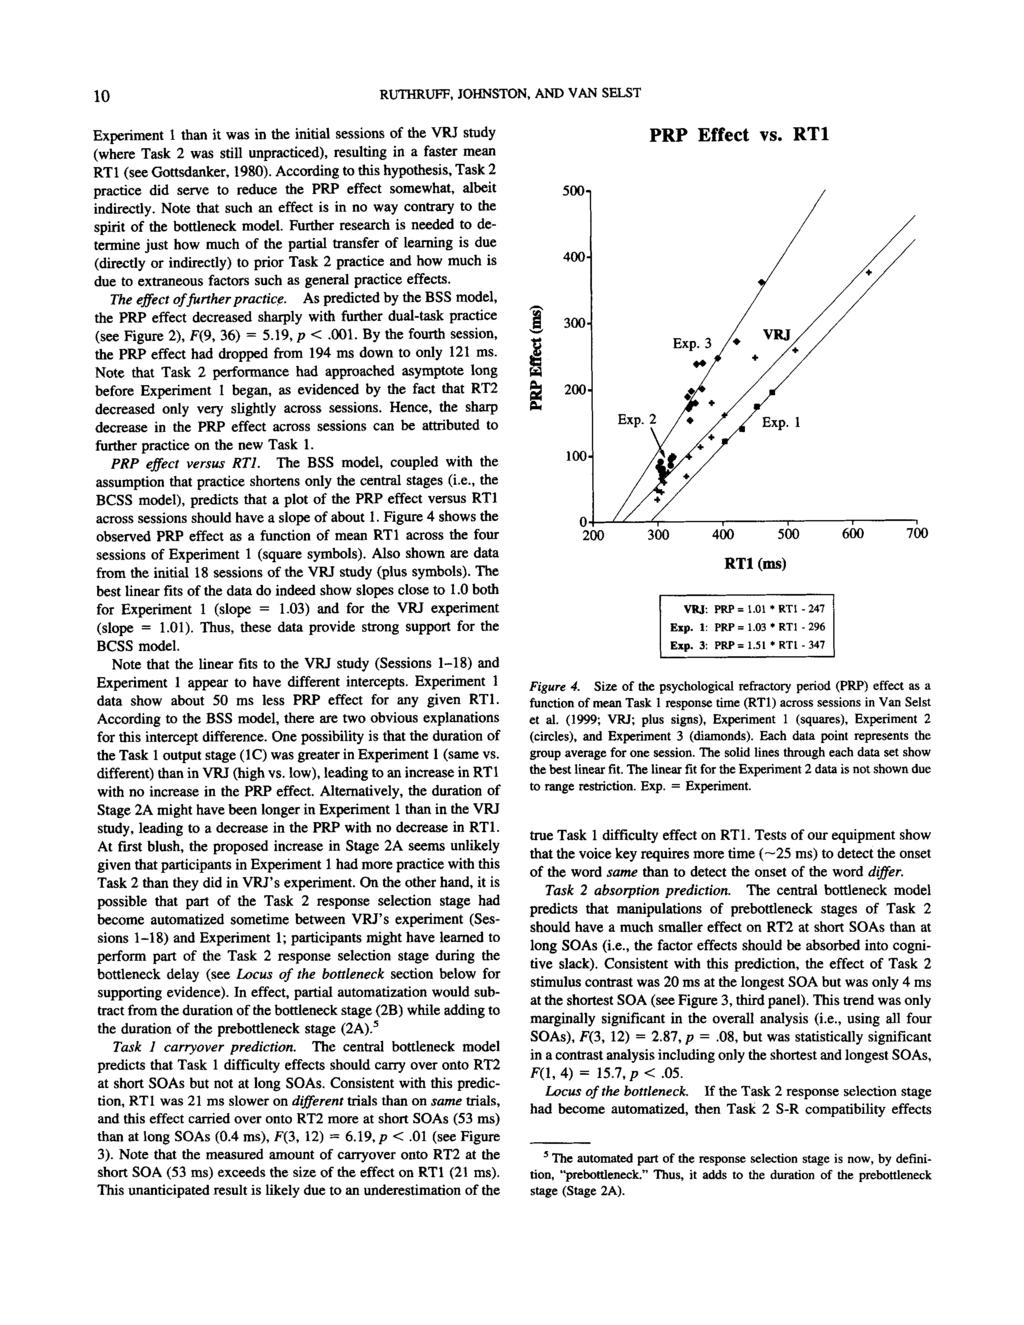 10 RUTHRUFF, JOHNSTON, AND VAN SELST Experiment 1 than it was in the initial sessions of the VRJ study (where Task 2 was still unpracticed), resulting in a faster mean RT1 (see Gottsdanker, 1980).